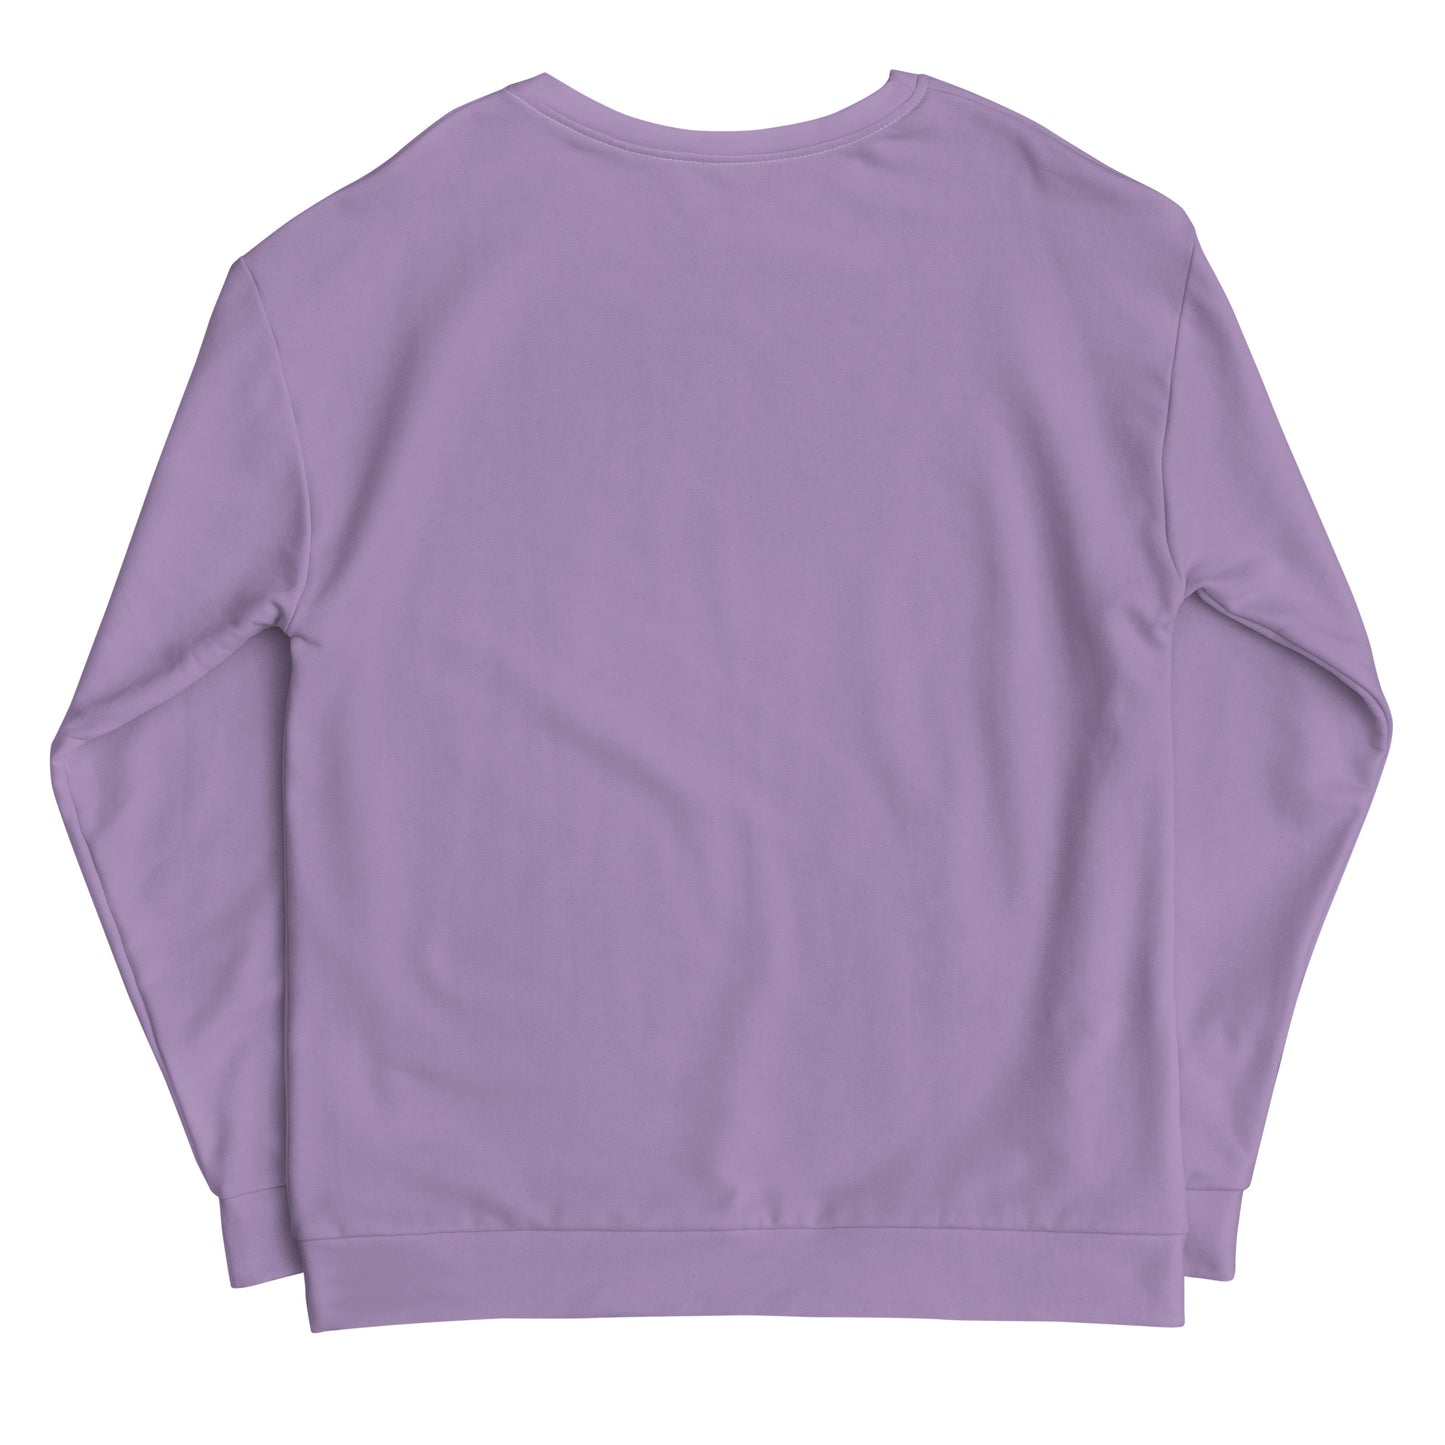 Lilac Climate Change Global Warming Statement - Sustainably Made Sweatshirt